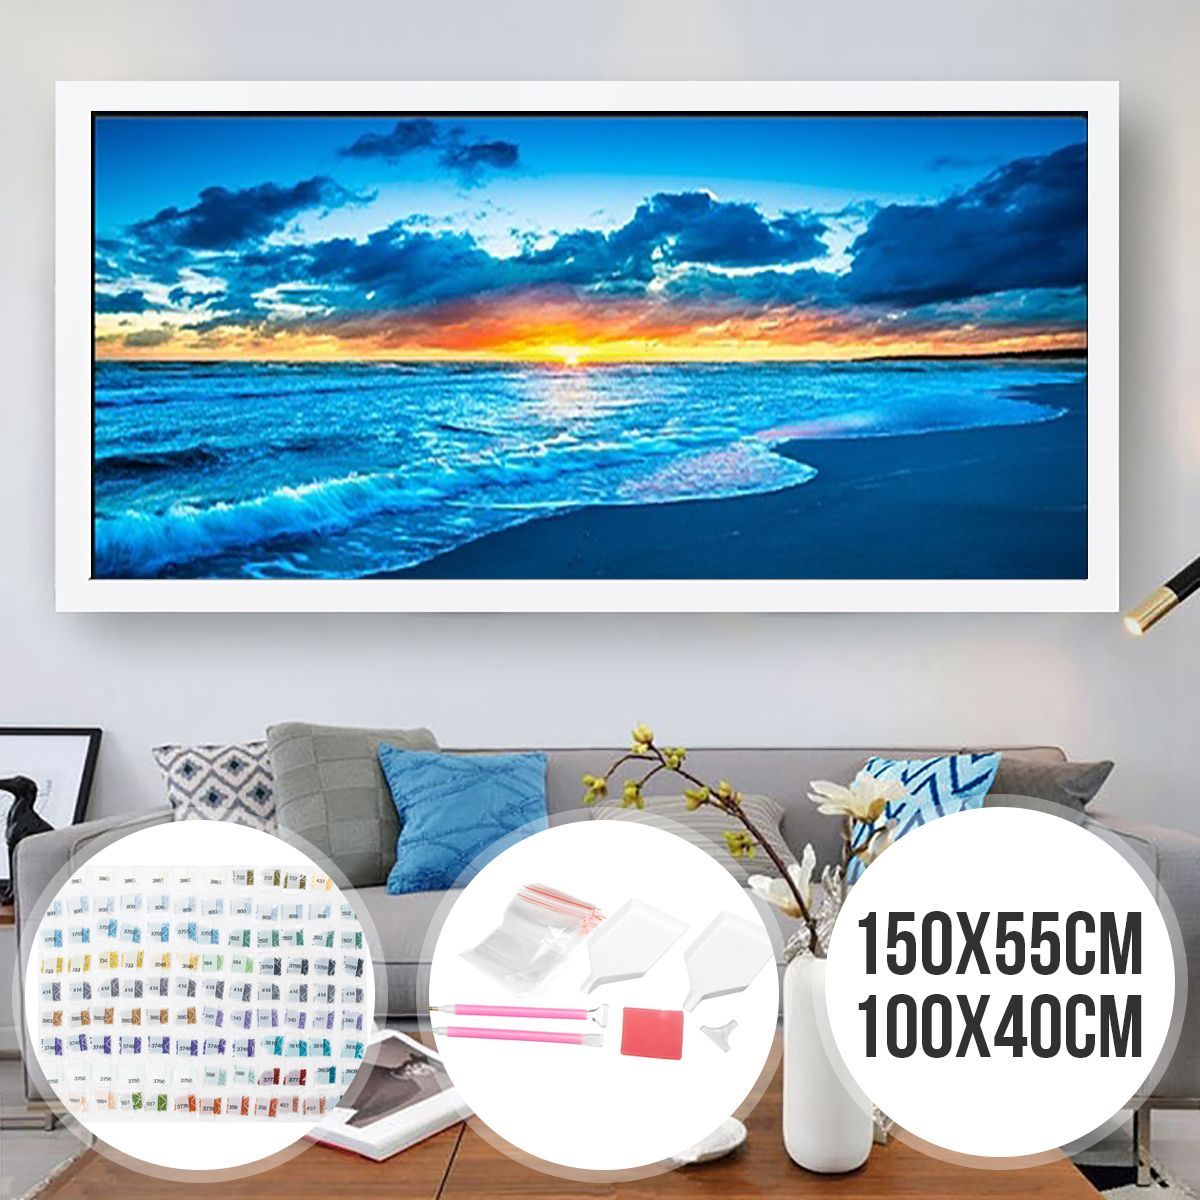 Full-Drill-5D-Diamond-Paintings-Tool-Sunset-Sea-Embroidery-Canvas-Home-Art-DIY-Decorations-1613095